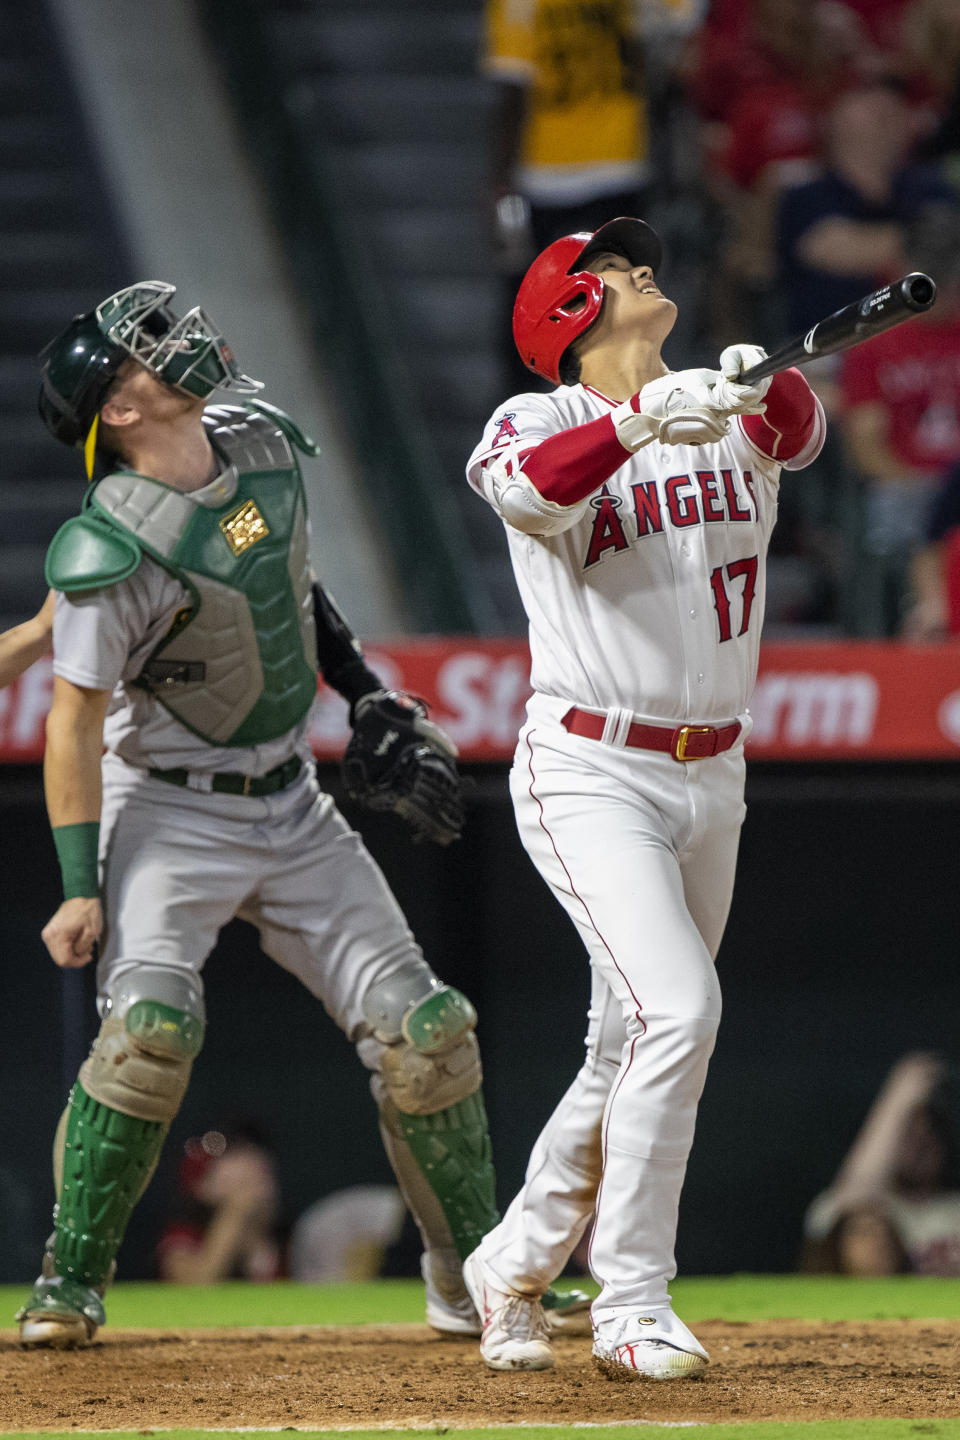 Los Angeles Angels' Shohei Ohtani, right, looks up with Oakland Athletics catcher Sean Murphy as Ohtani flies out during the fifth inning of a baseball game in Anaheim, Calif., Wednesday, Sept. 28, 2022. (AP Photo/Alex Gallardo)